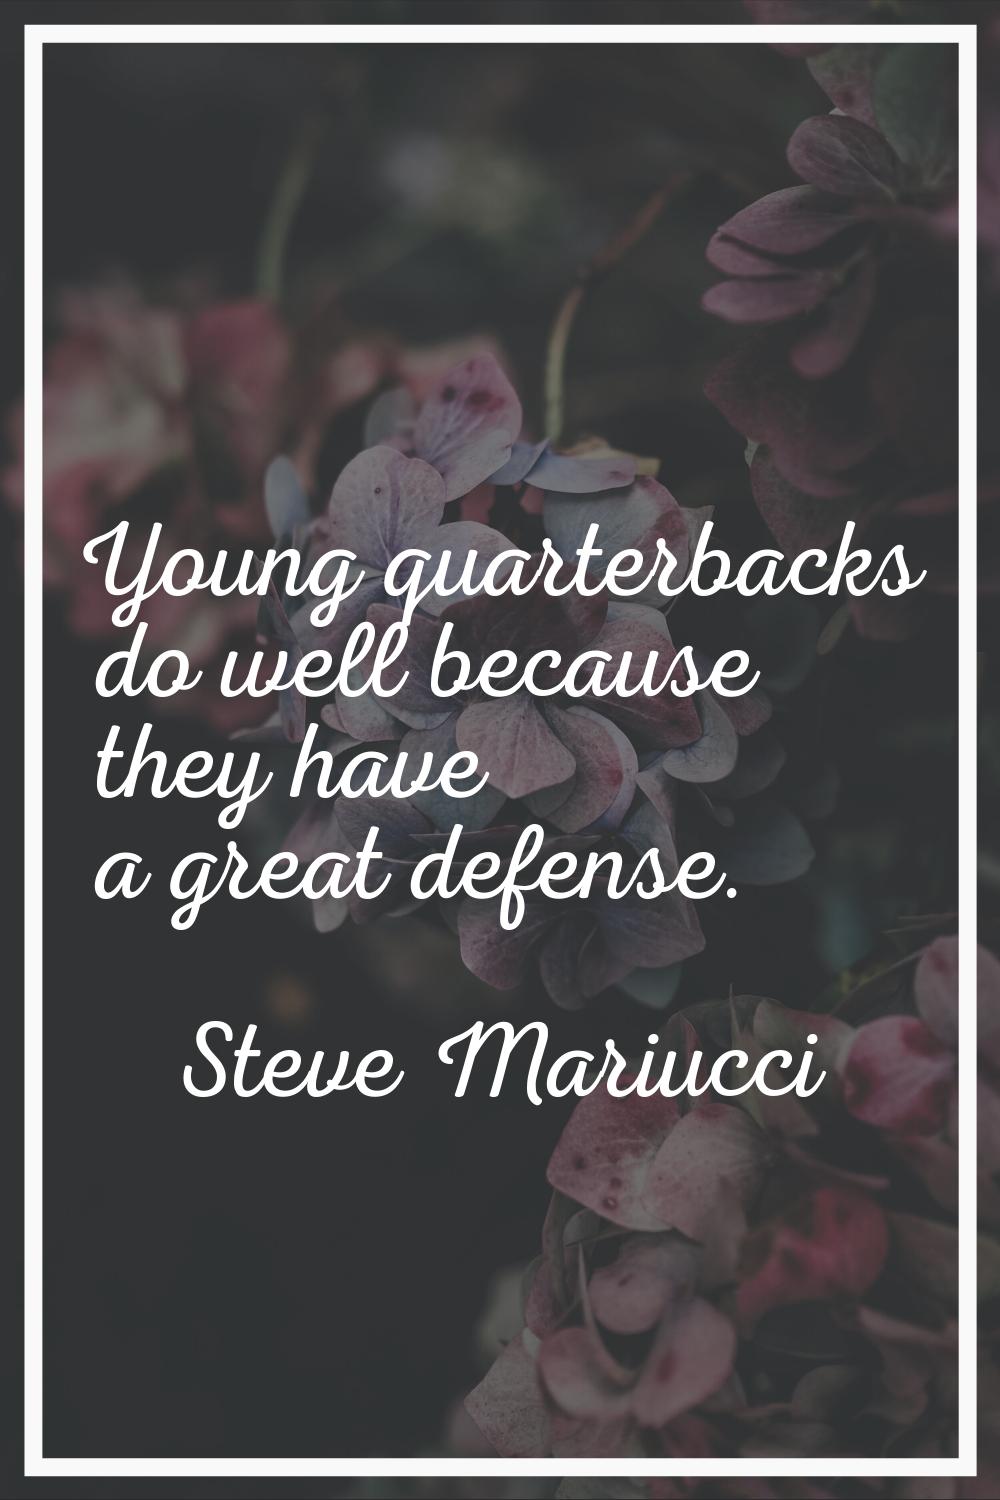 Young quarterbacks do well because they have a great defense.